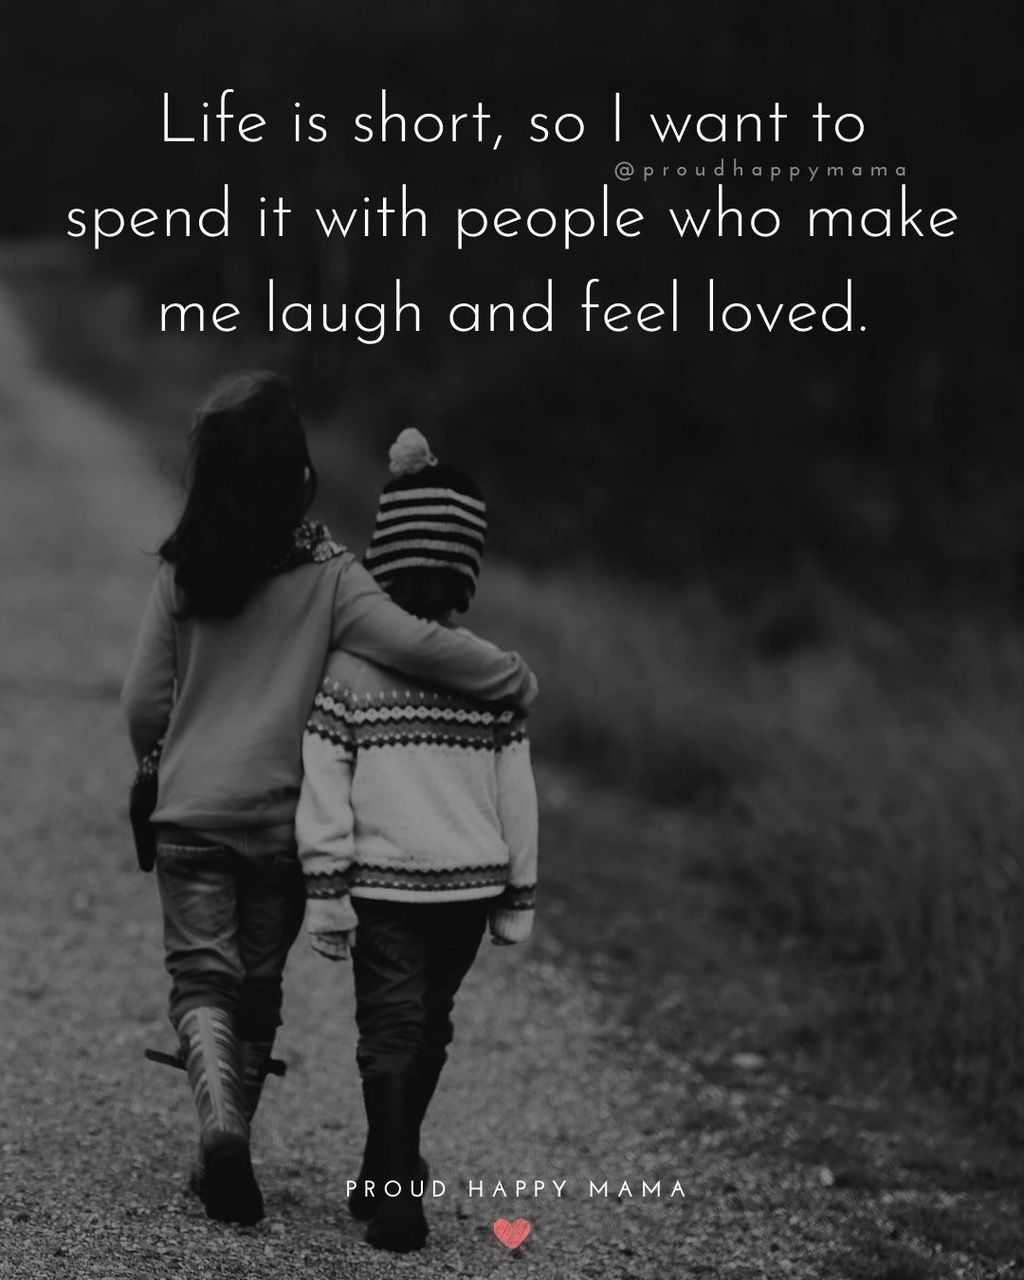 Quotes With Family | Life is short, so I want to spend it with people who make me laugh and feel loved.